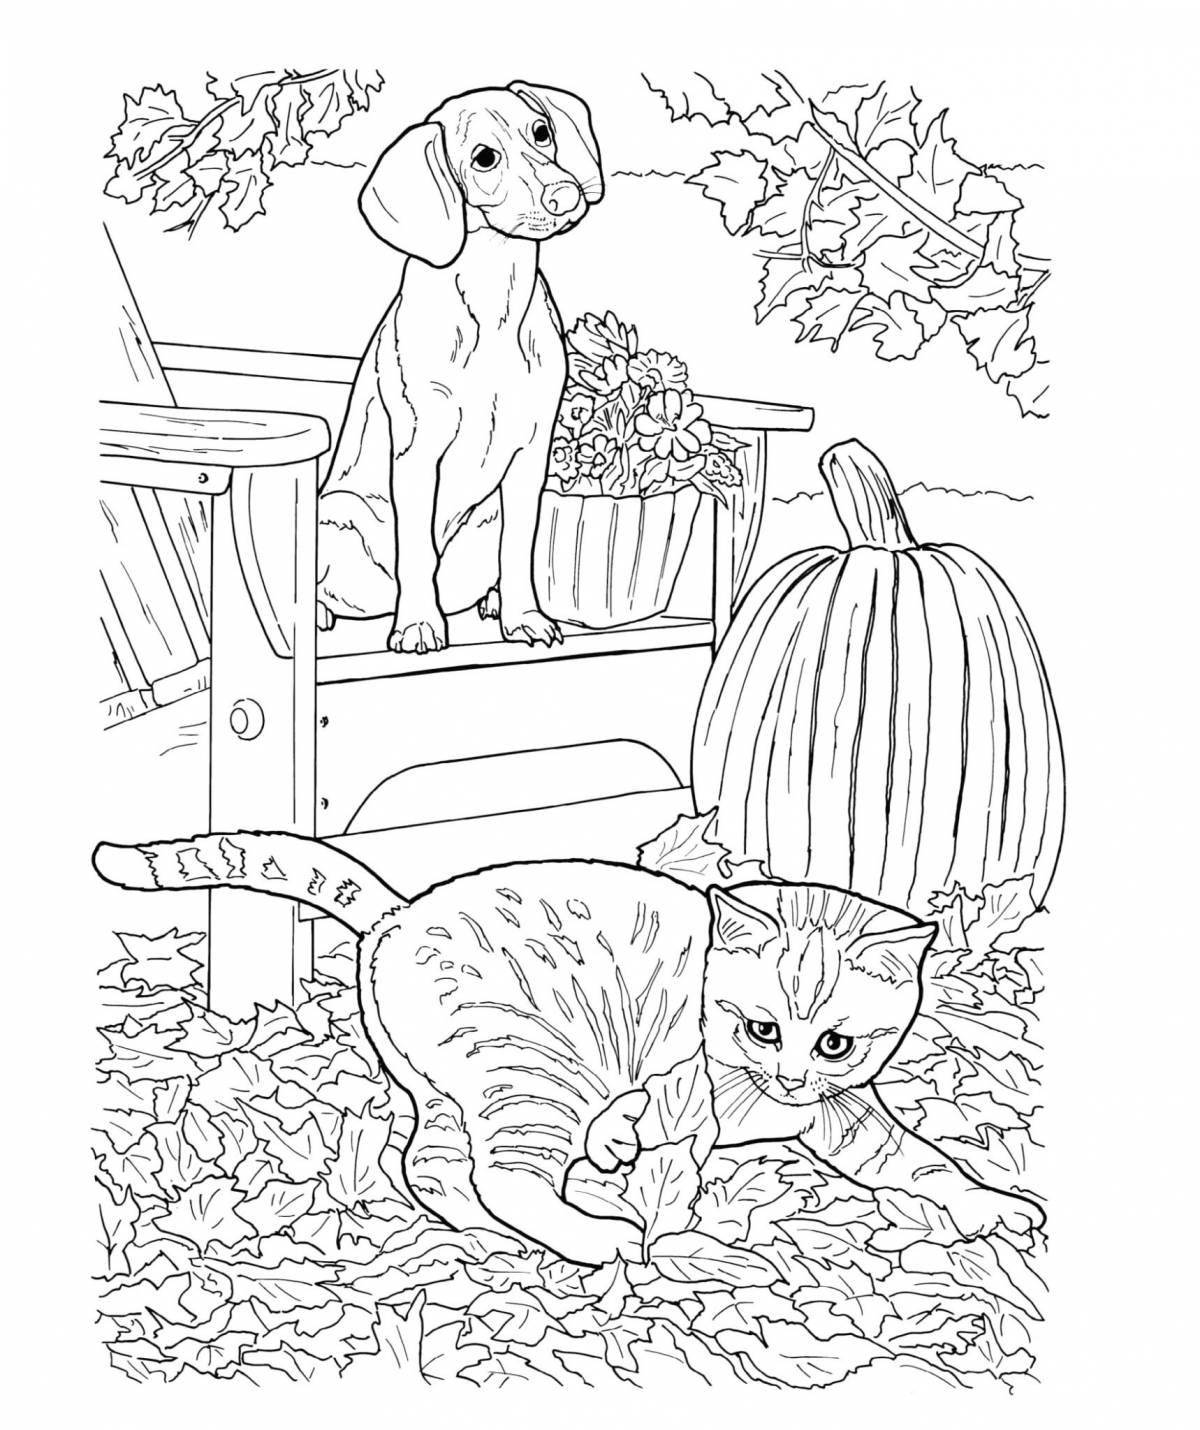 Joyful coloring animal cats and dogs